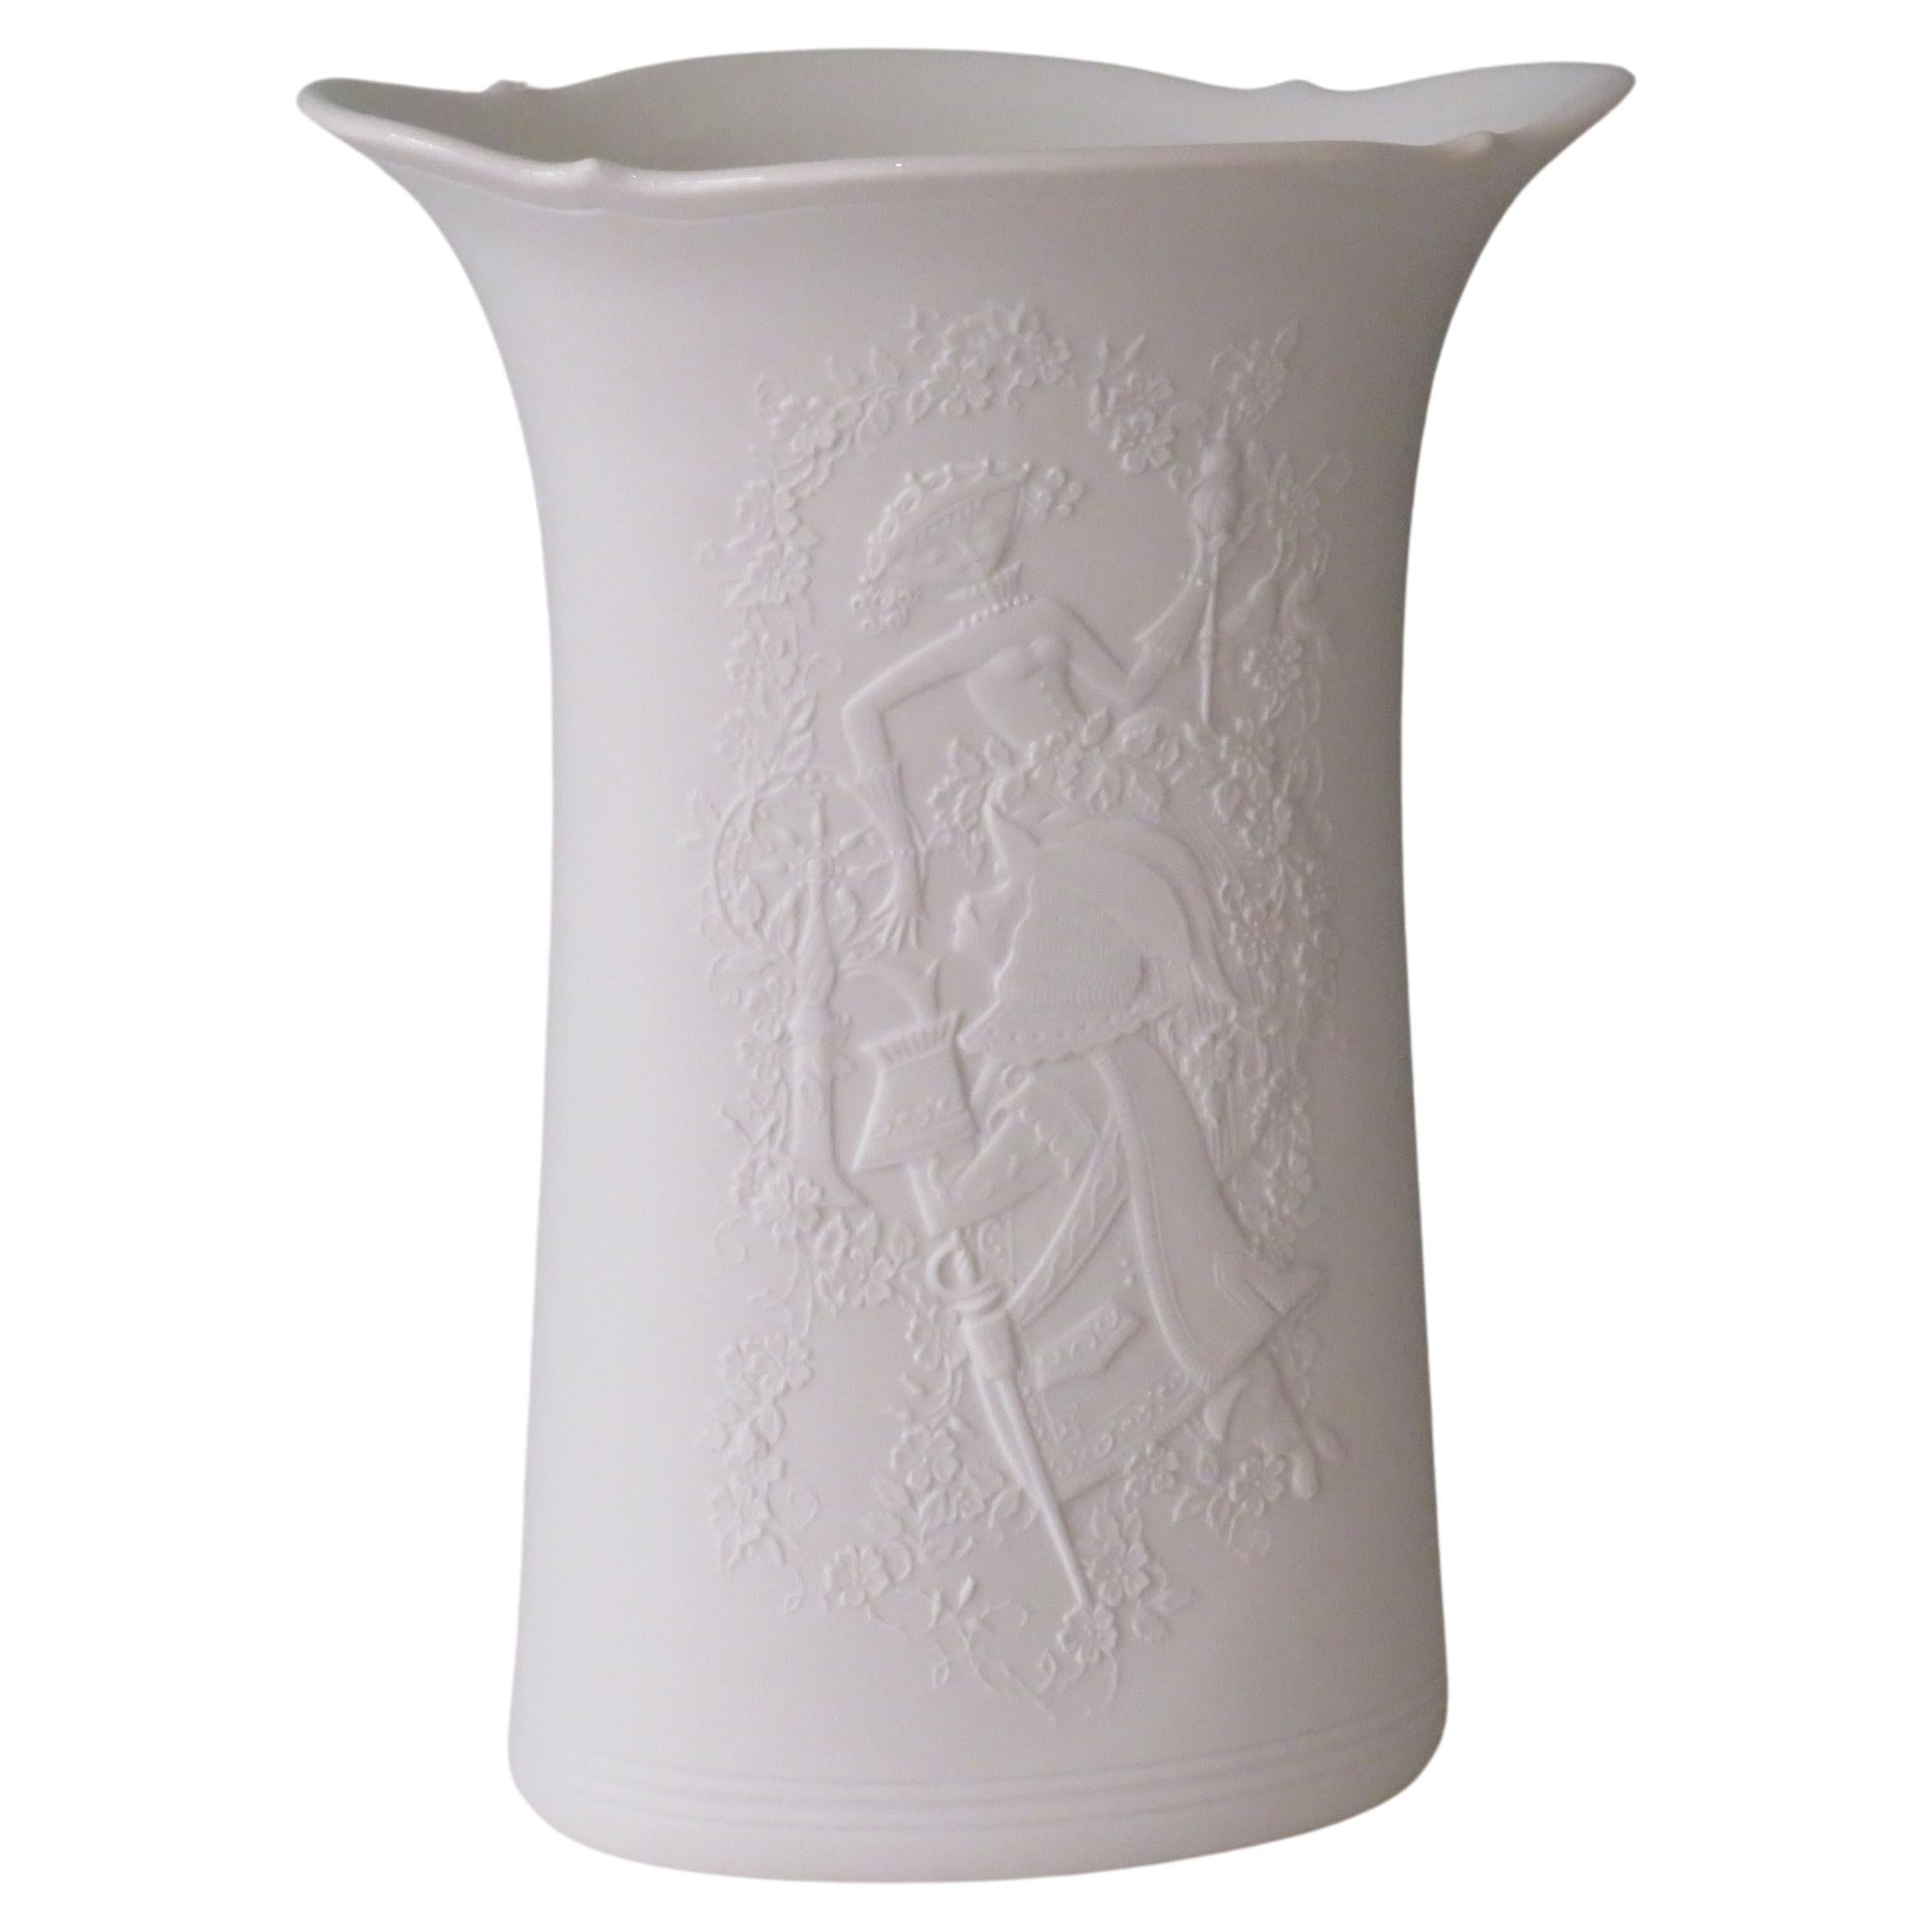 White Biscuit Vase by AK Kaiser, Germany 1970s with Romantic Embossed Motief